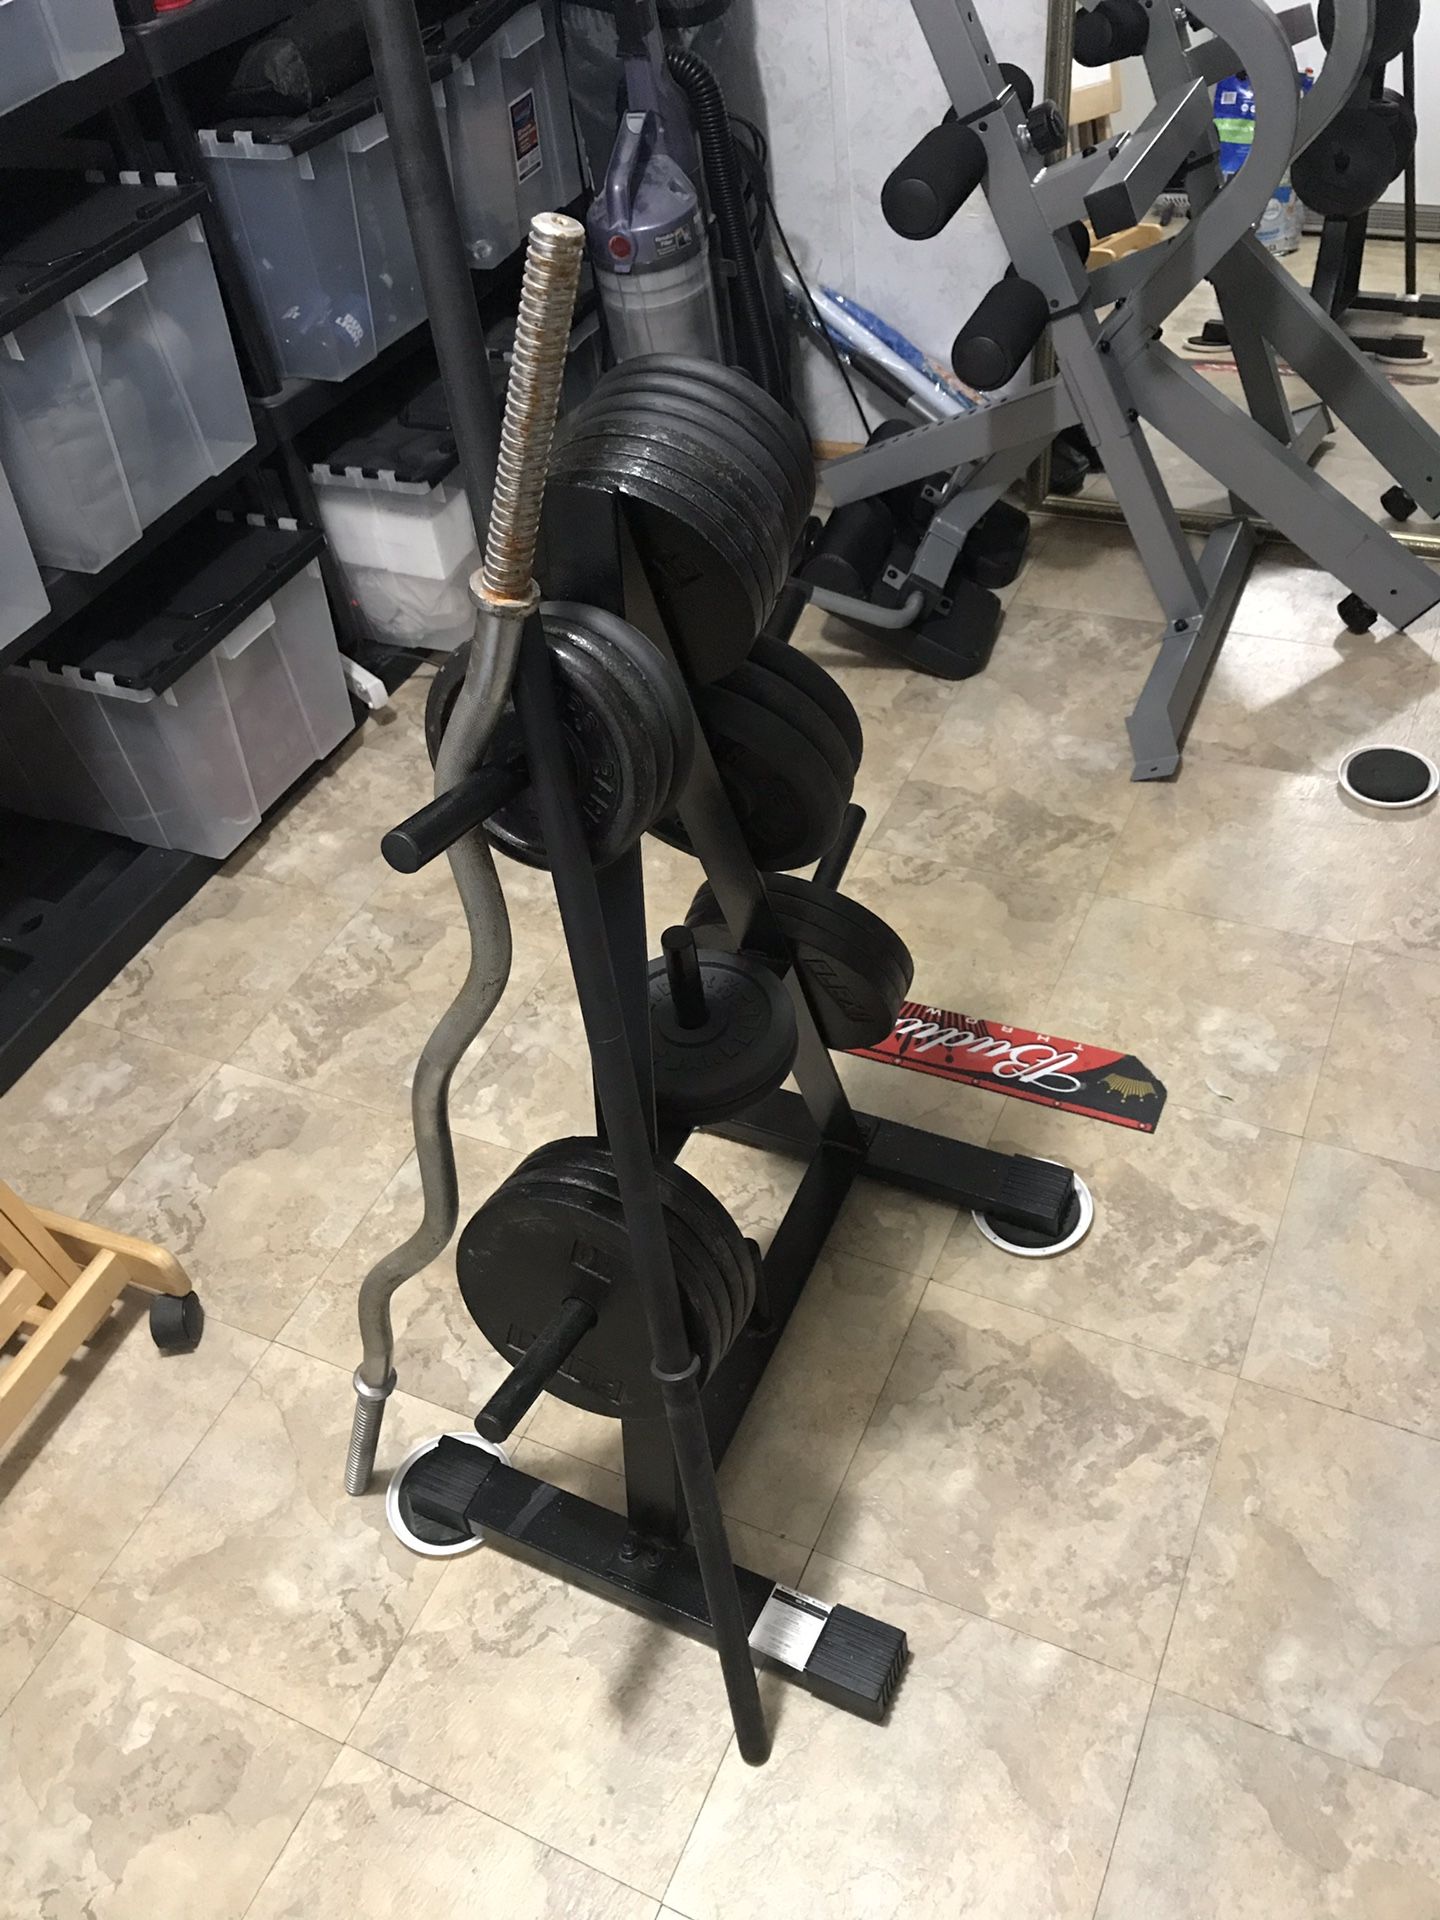 Weights and weight rack